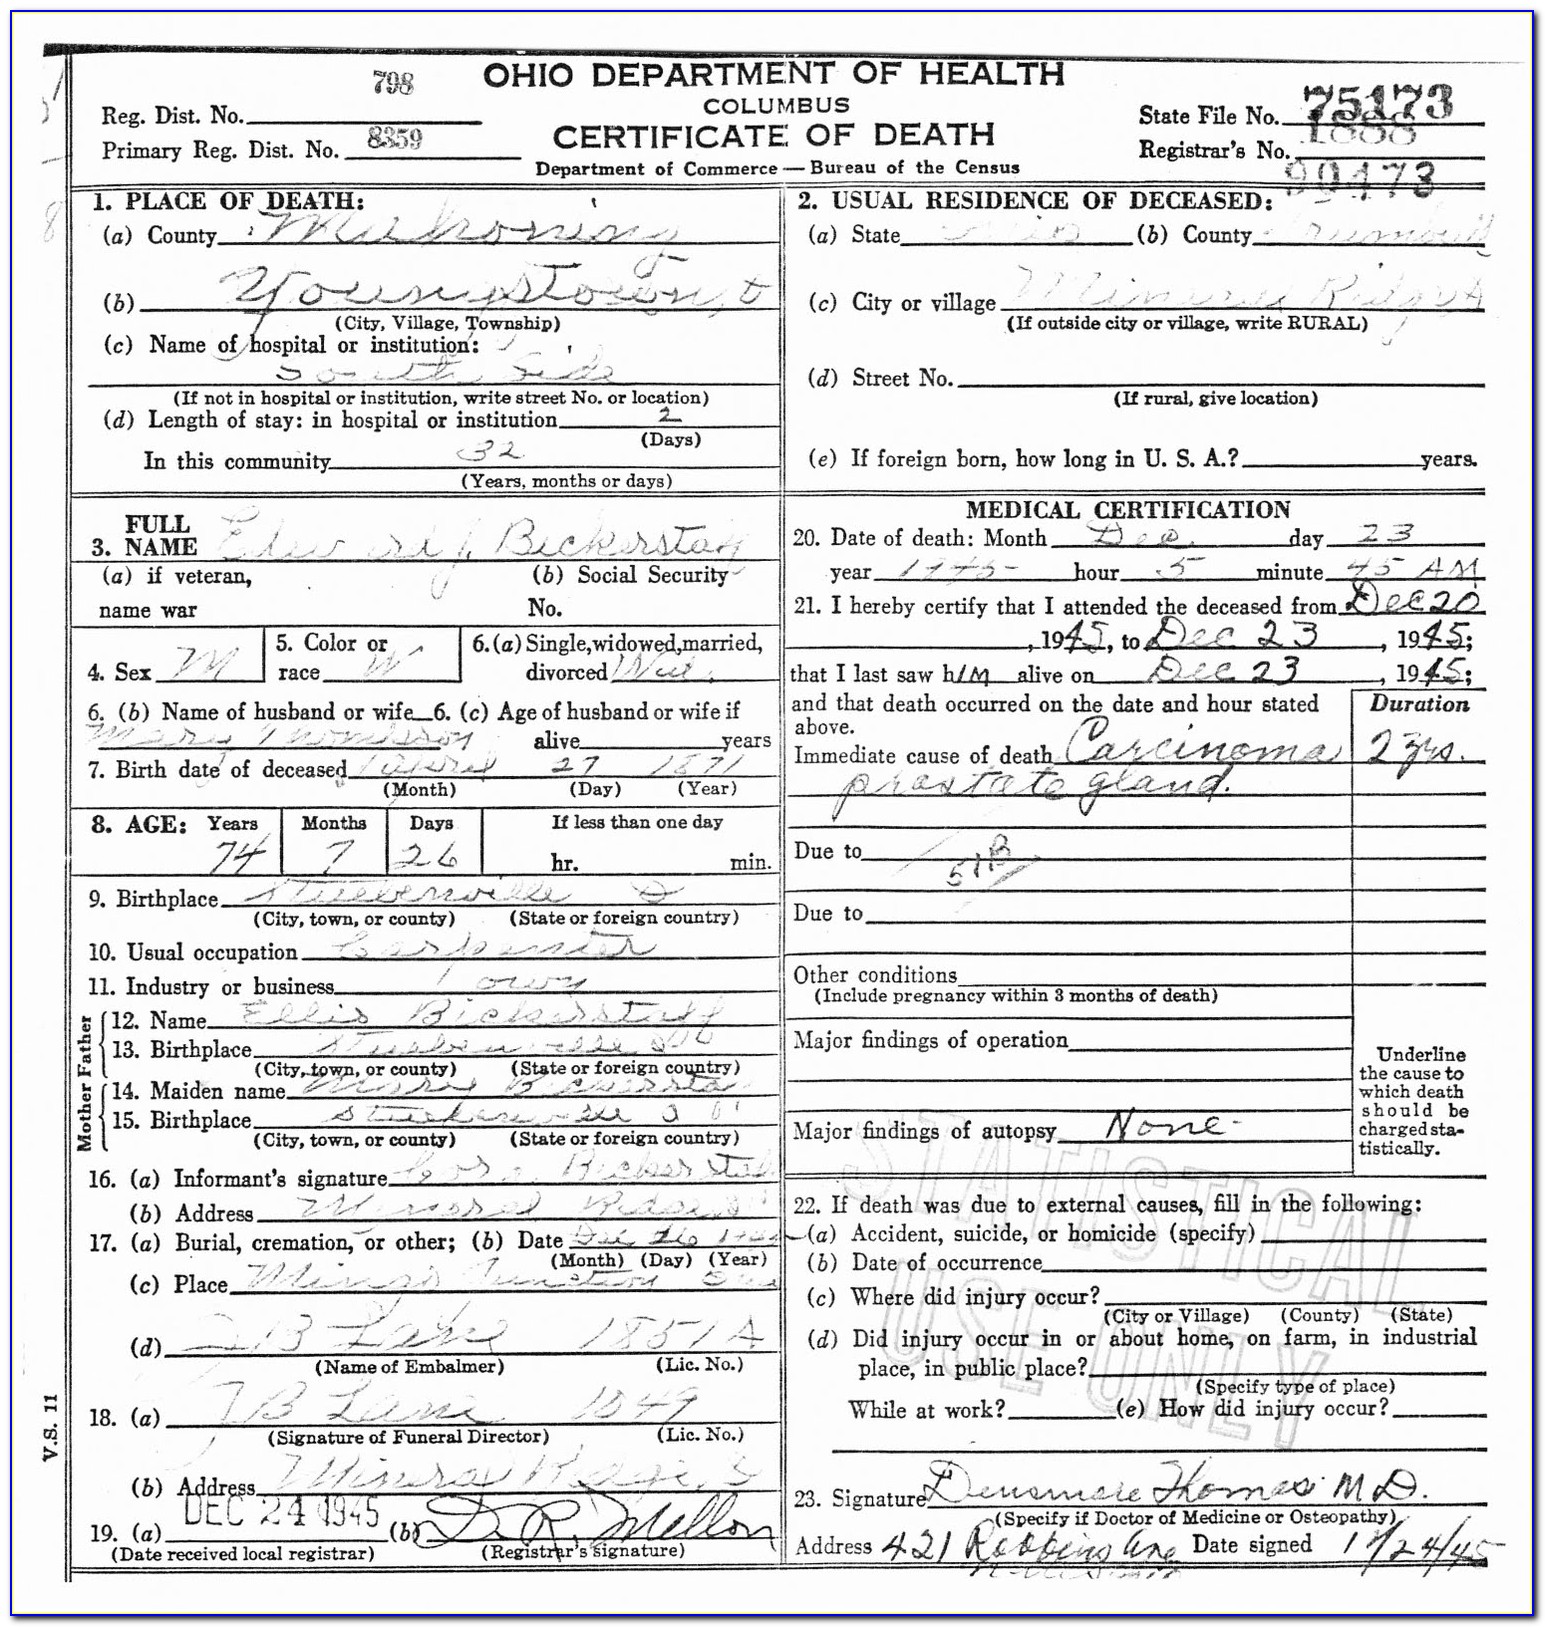 Trumbull County Oh Birth Certificate